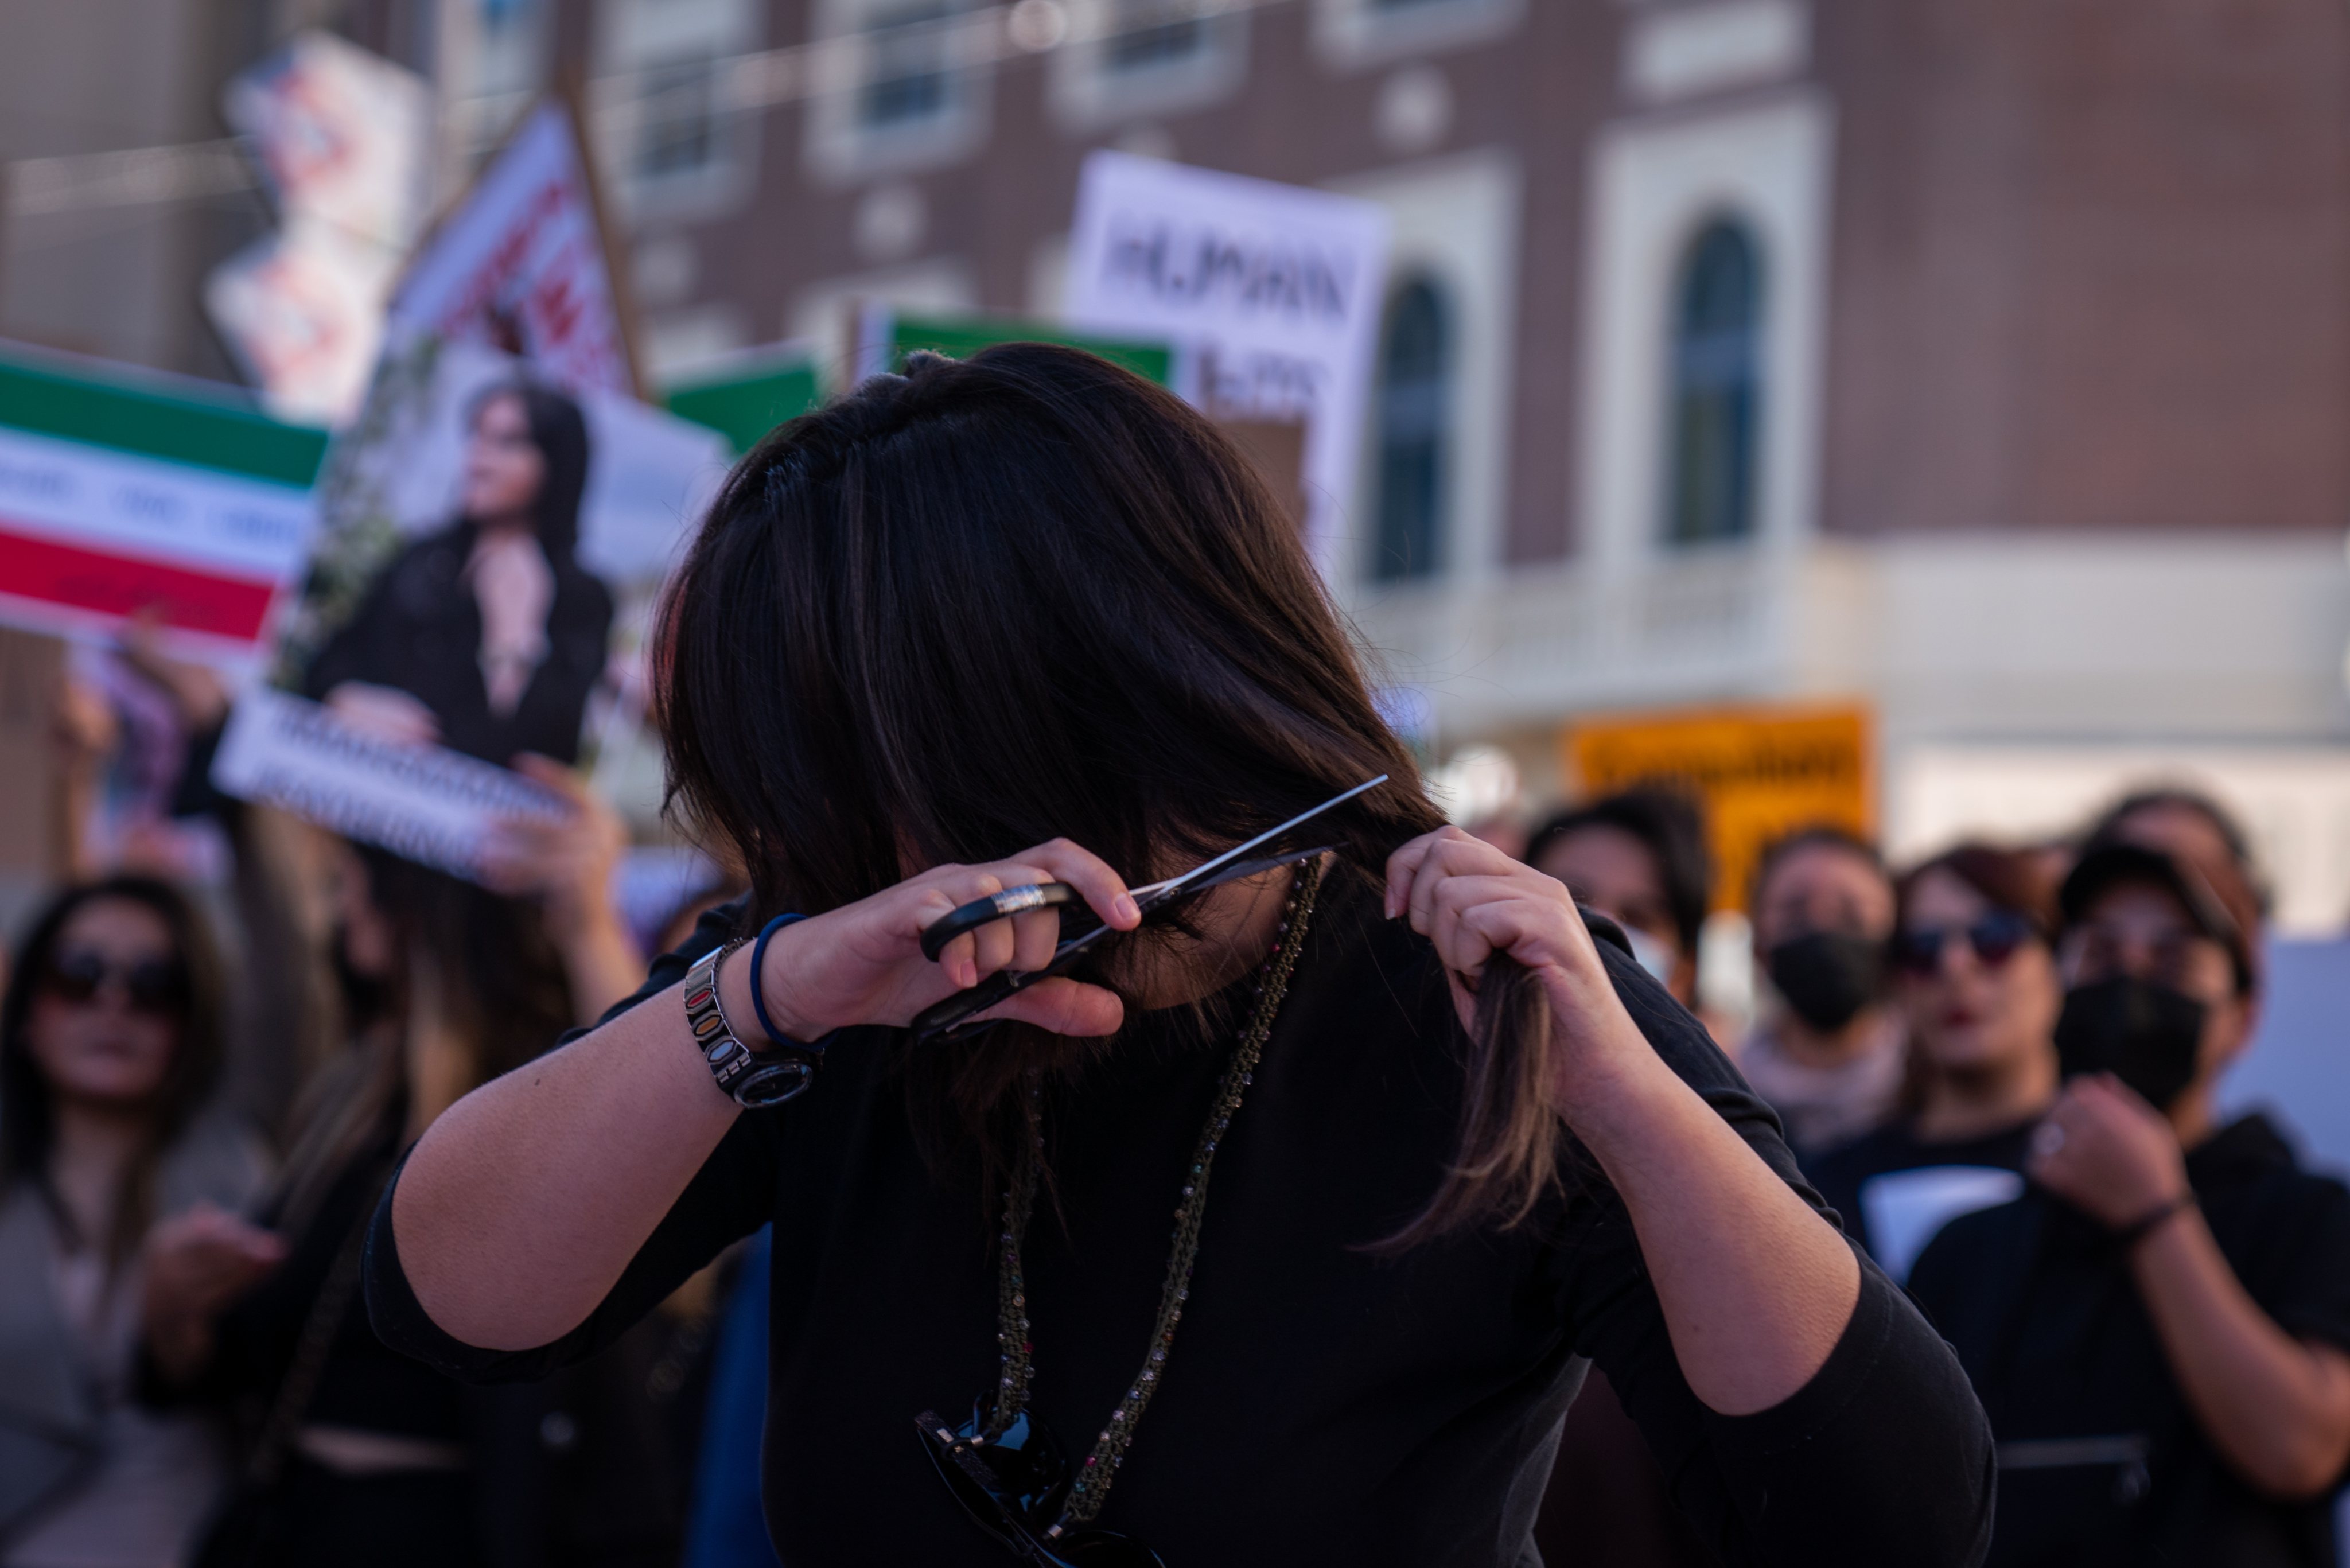 A woman seen cutting off her hair during the demonstration